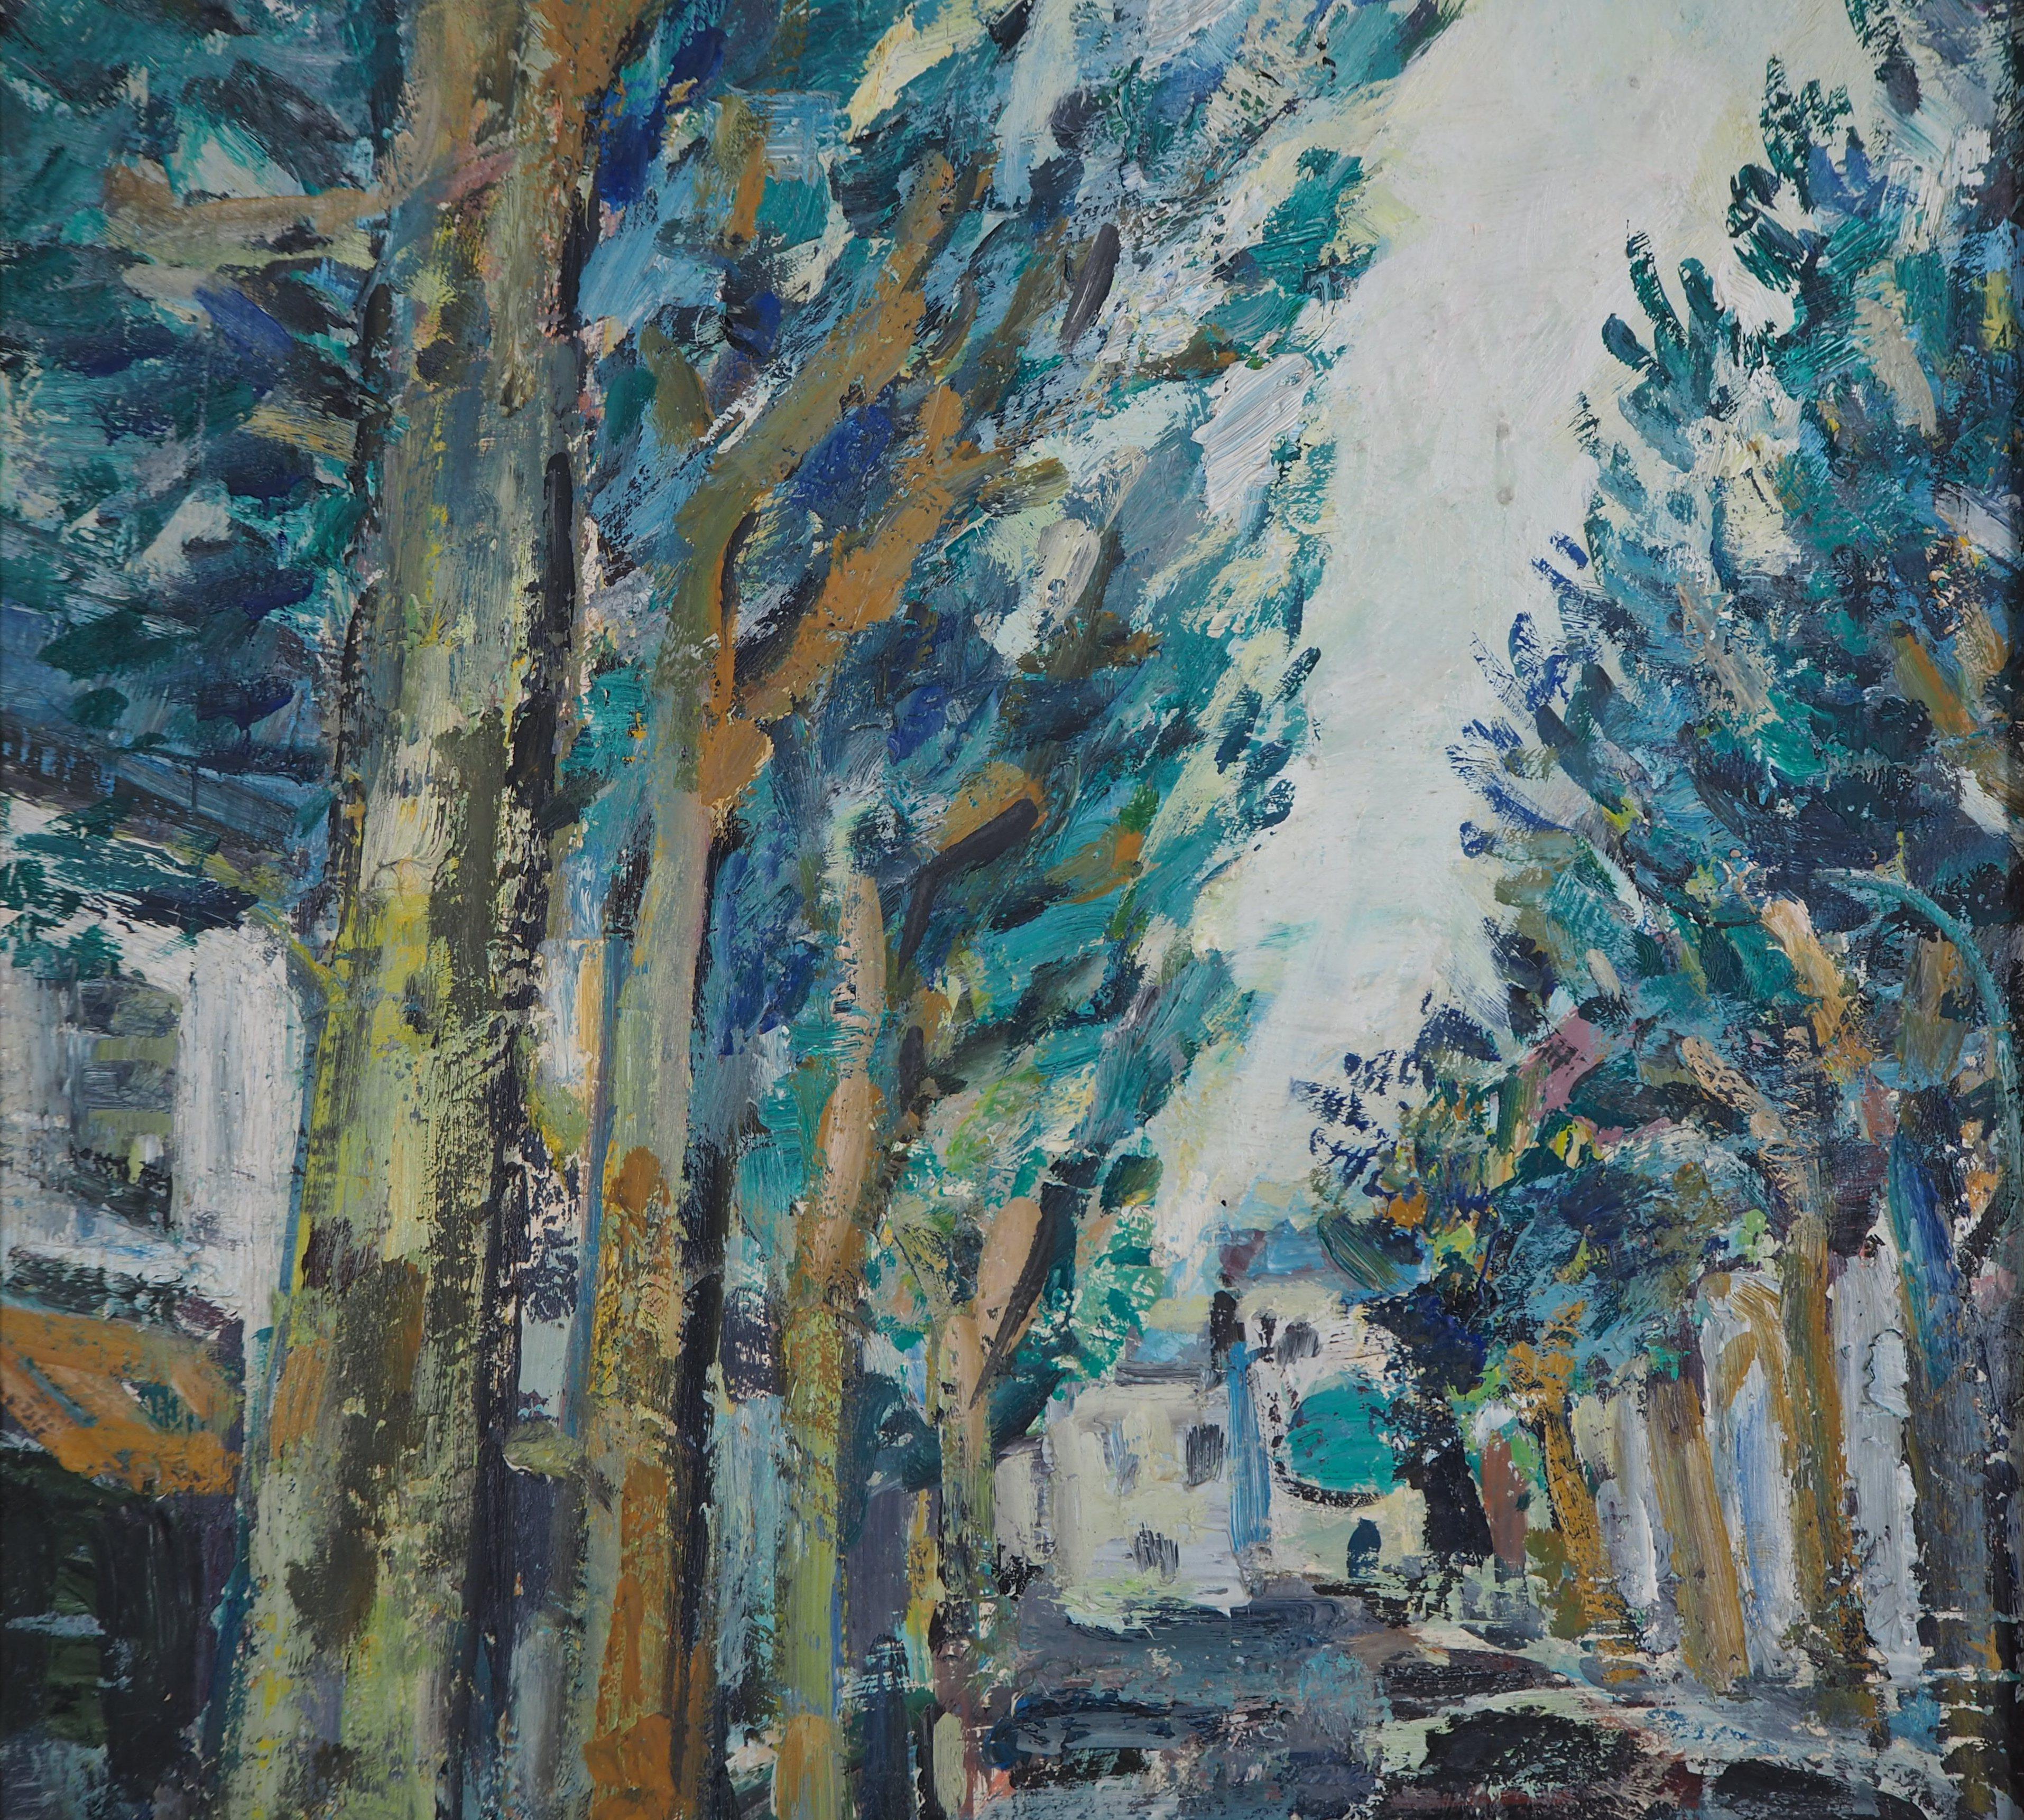 Spring, Tree-Lined Avenue - Original oil painting, signed - Brown Figurative Painting by Robert Savary